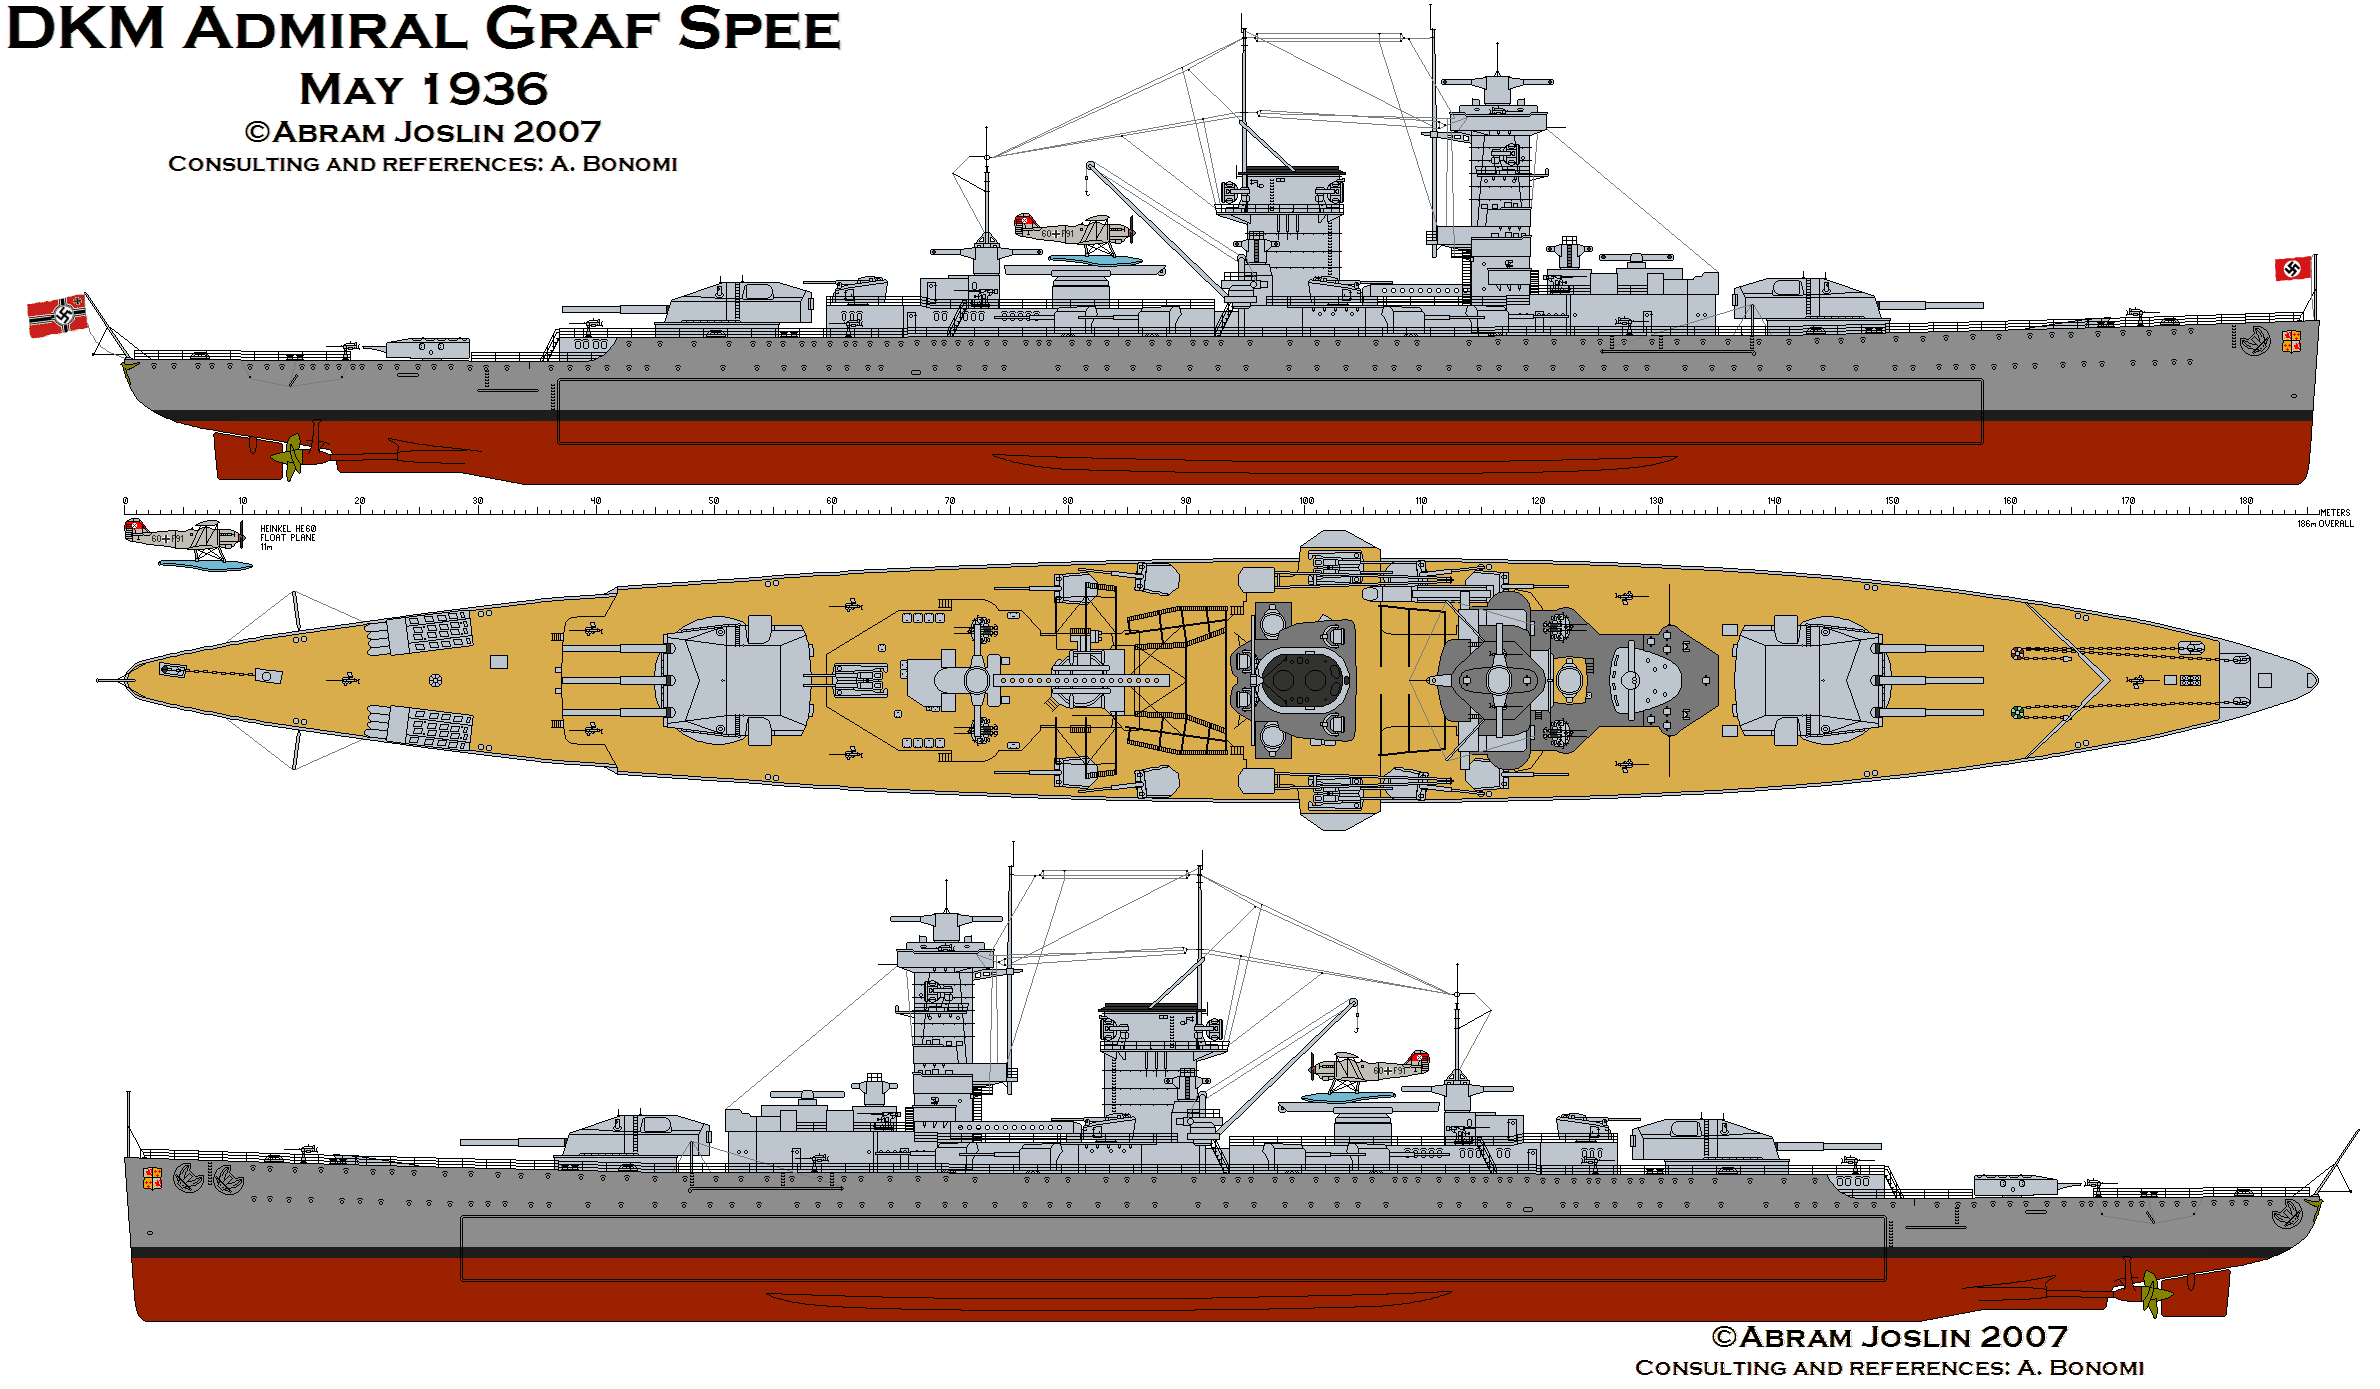 German Cruiser Admiral Graf Spee Backgrounds, Compatible - PC, Mobile, Gadgets| 2380x1389 px